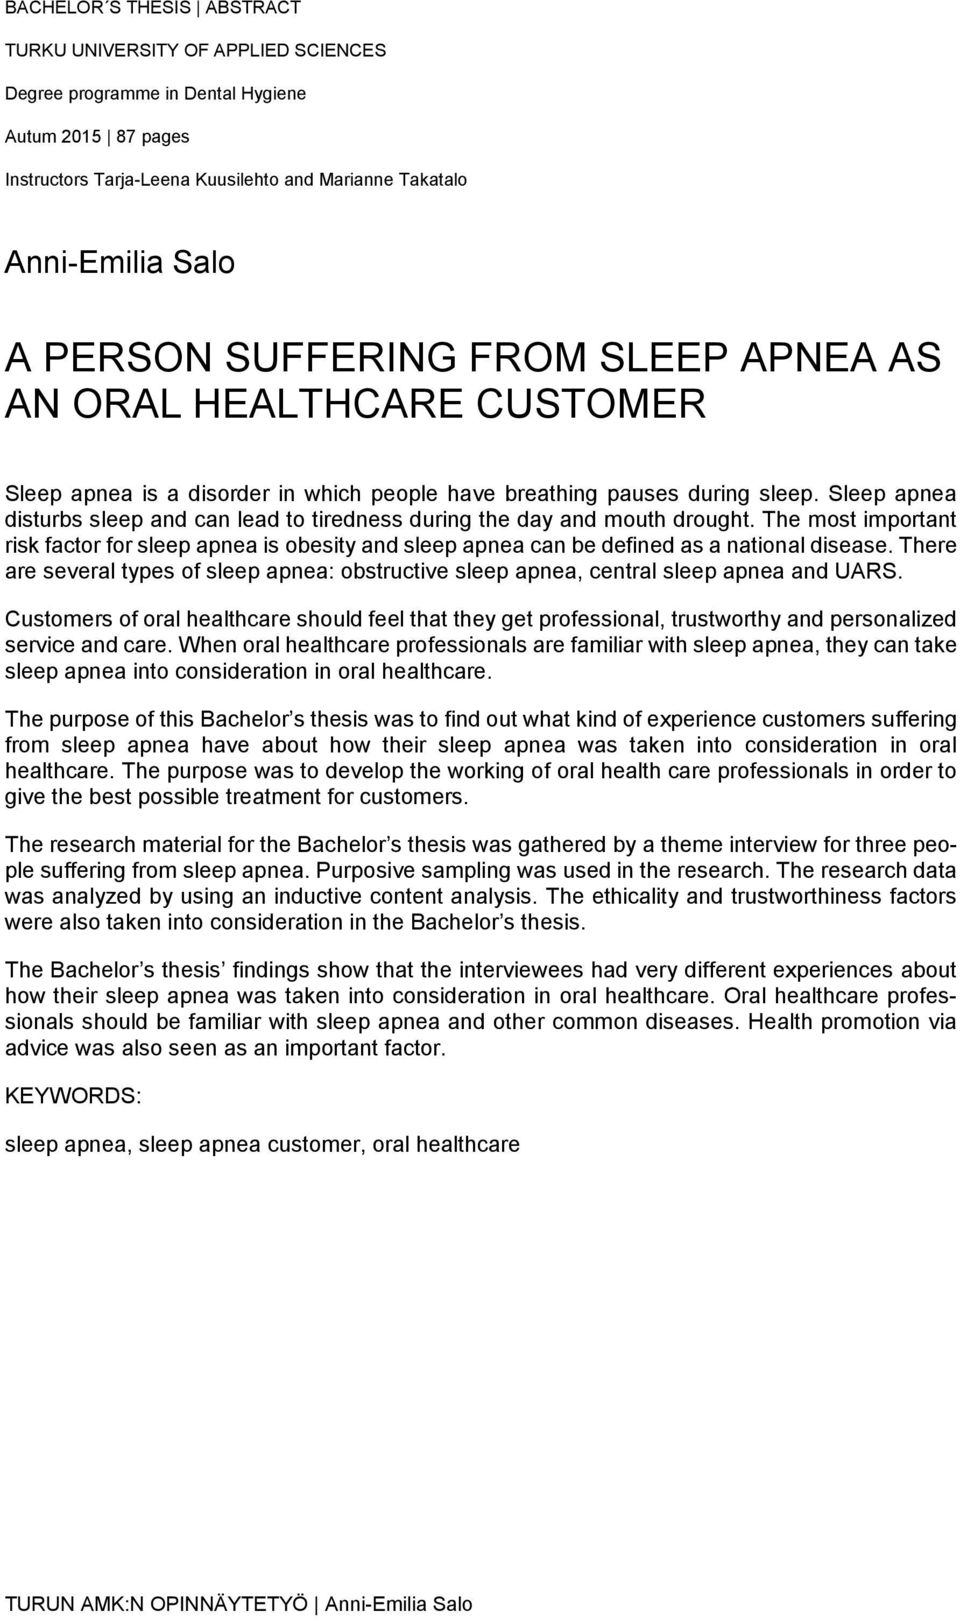 Sleep apnea disturbs sleep and can lead to tiredness during the day and mouth drought. The most important risk factor for sleep apnea is obesity and sleep apnea can be defined as a national disease.